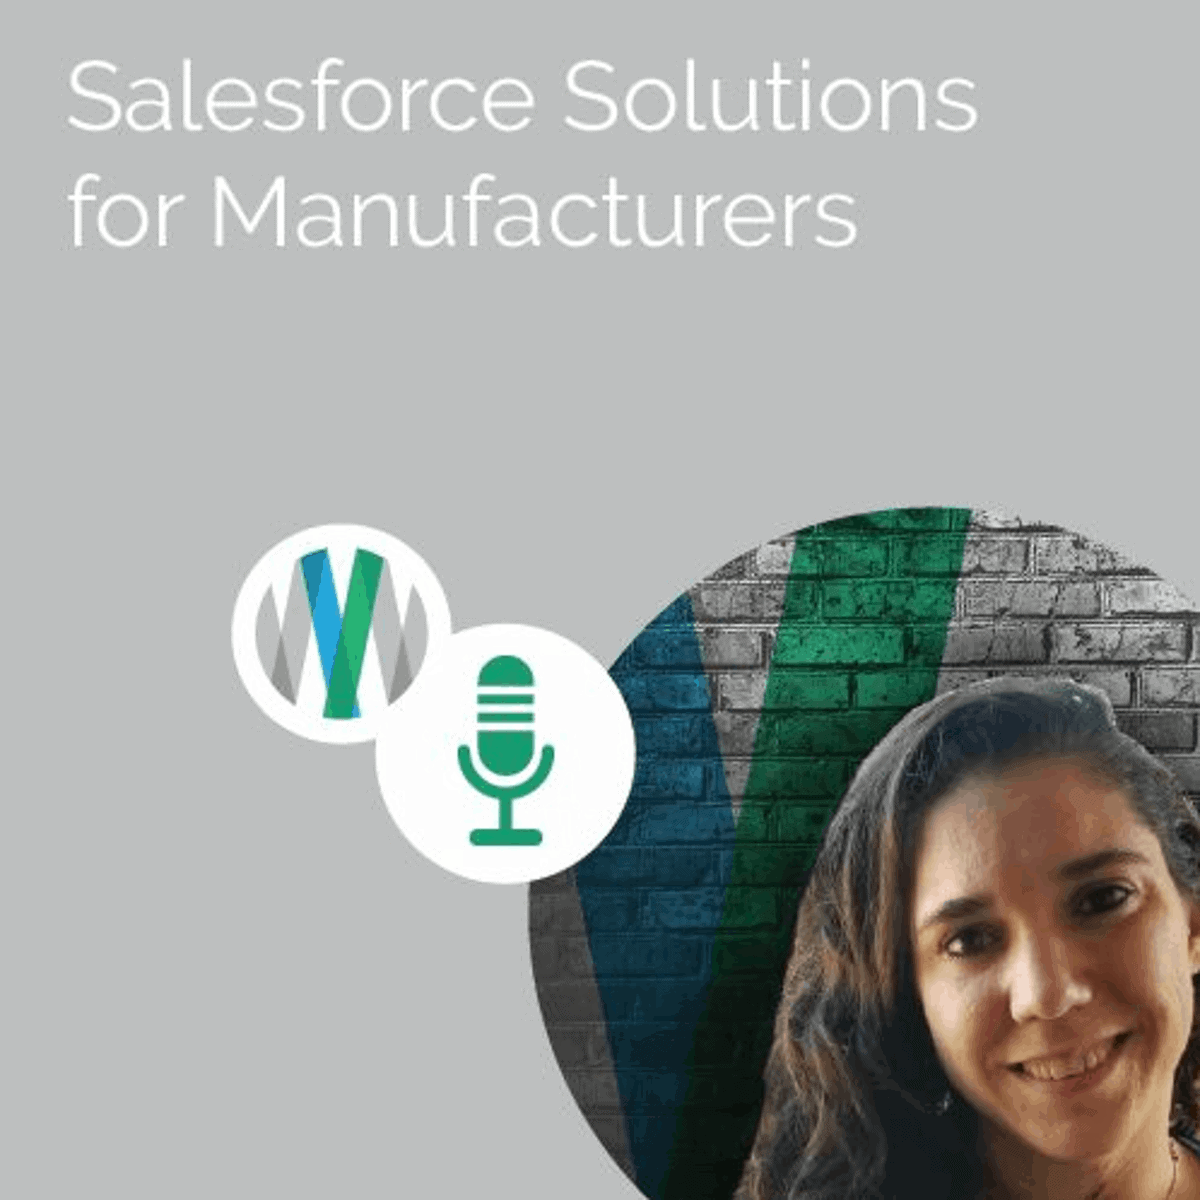 Salesforce Solutions for Manufacturers